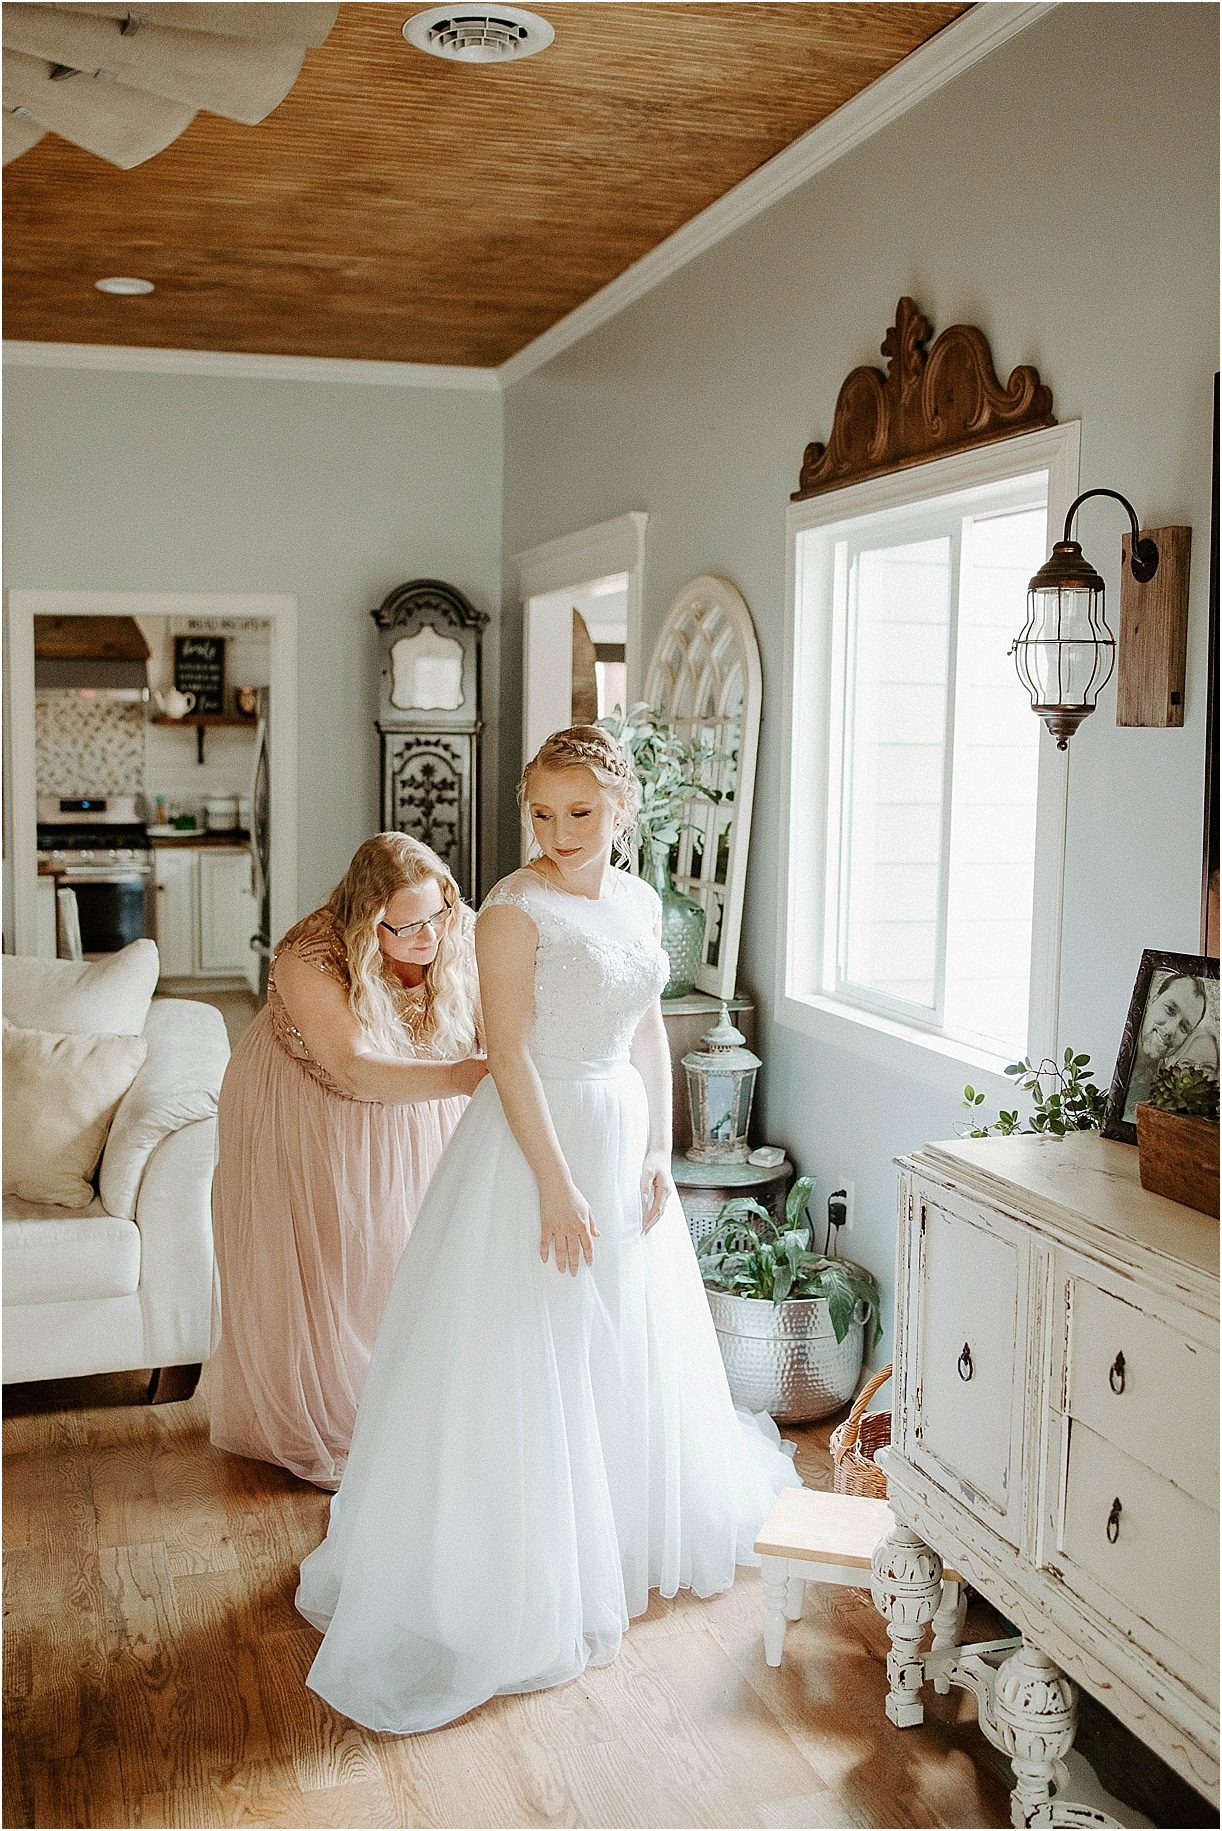 Small Intimate Wedding During Coronavirus What to Do COVID 19 | Hill City Bride Virginia Weddings Getting Ready